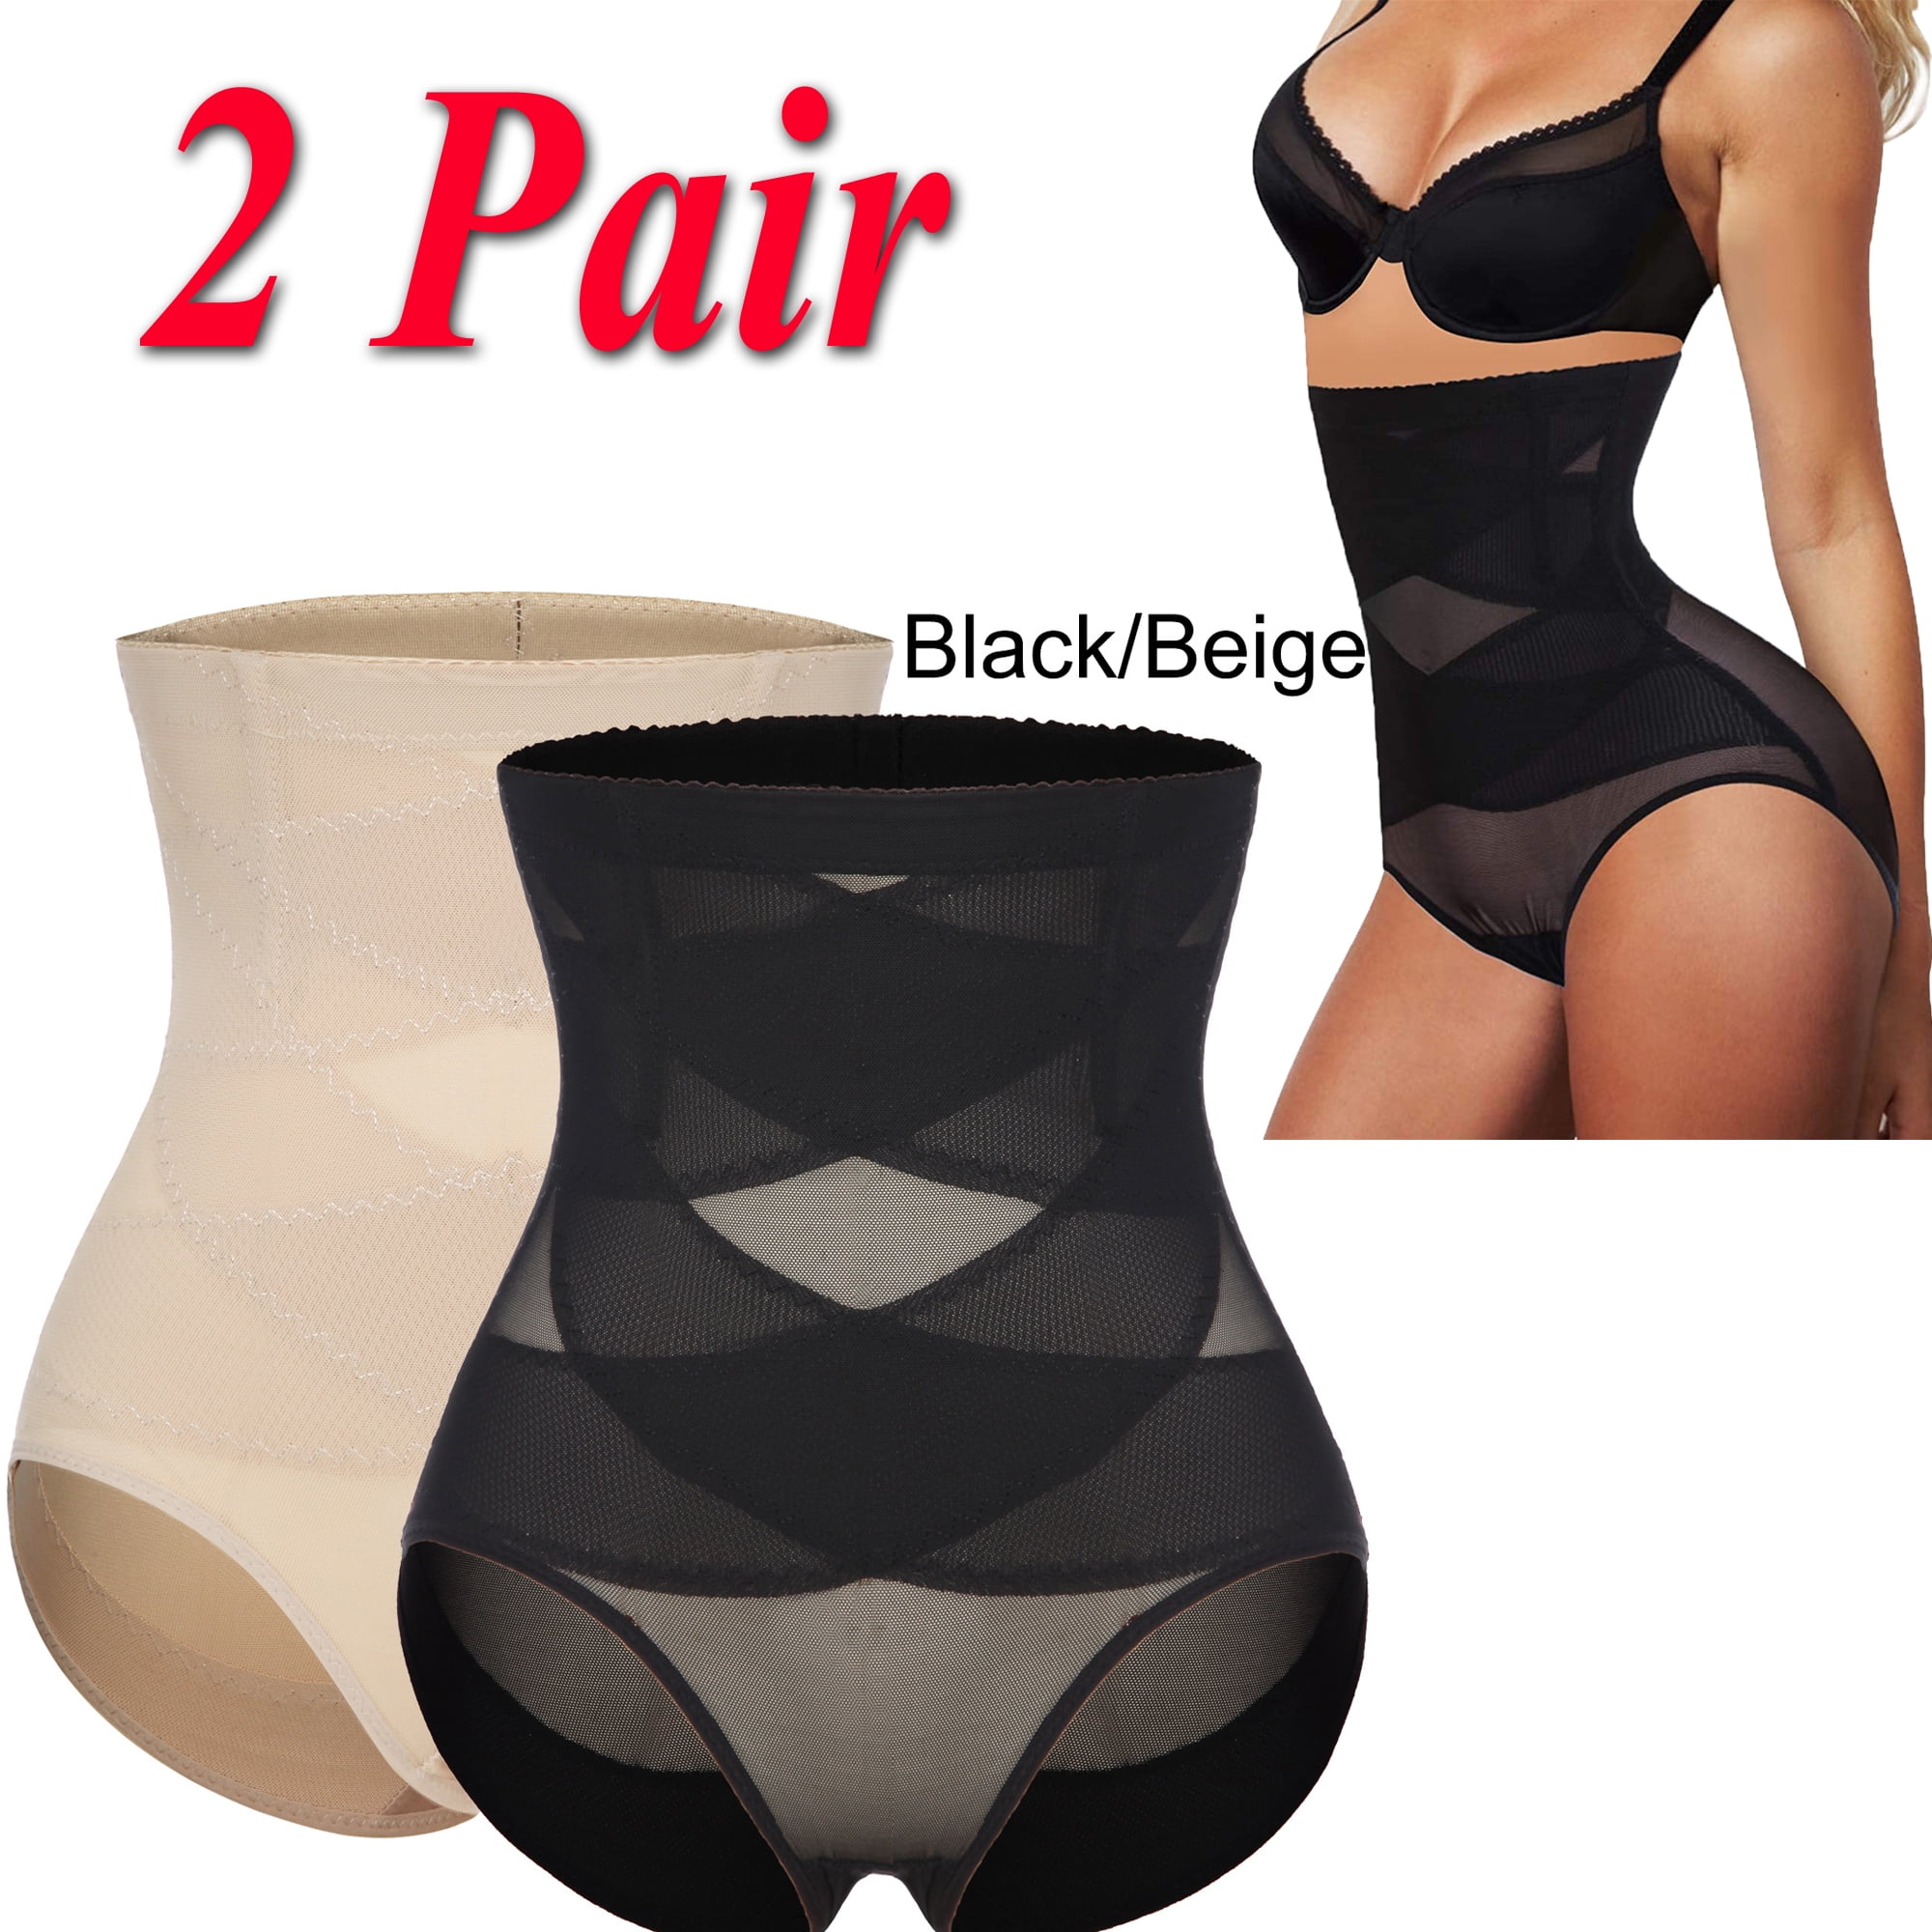 2 Pairs Cross Compression ABS Shaping Pants,Women Butt Lifter Shapewear Hi-Waist Double Tummy Control Panty Waist Trainer Body Shaper 